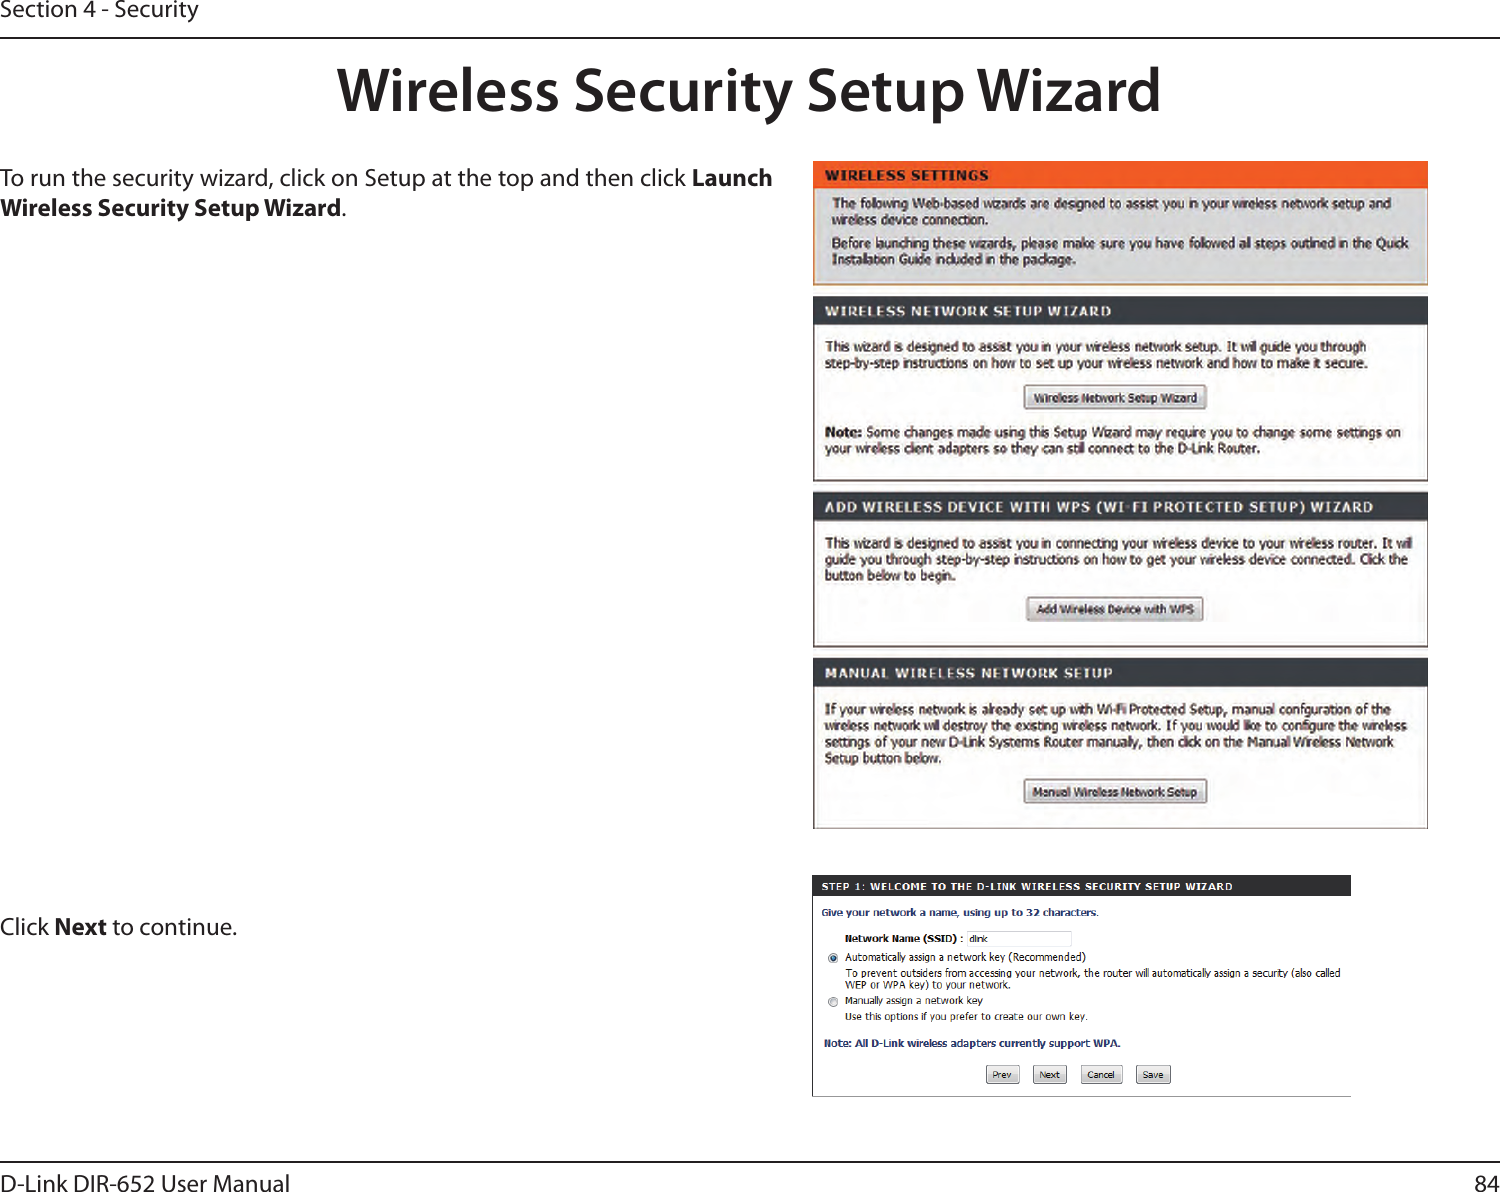 84D-Link DIR-652 User ManualSection 4 - SecurityWireless Security Setup WizardTo run the security wizard, click on Setup at the top and then click Launch Wireless Security Setup Wizard.Click Next to continue.